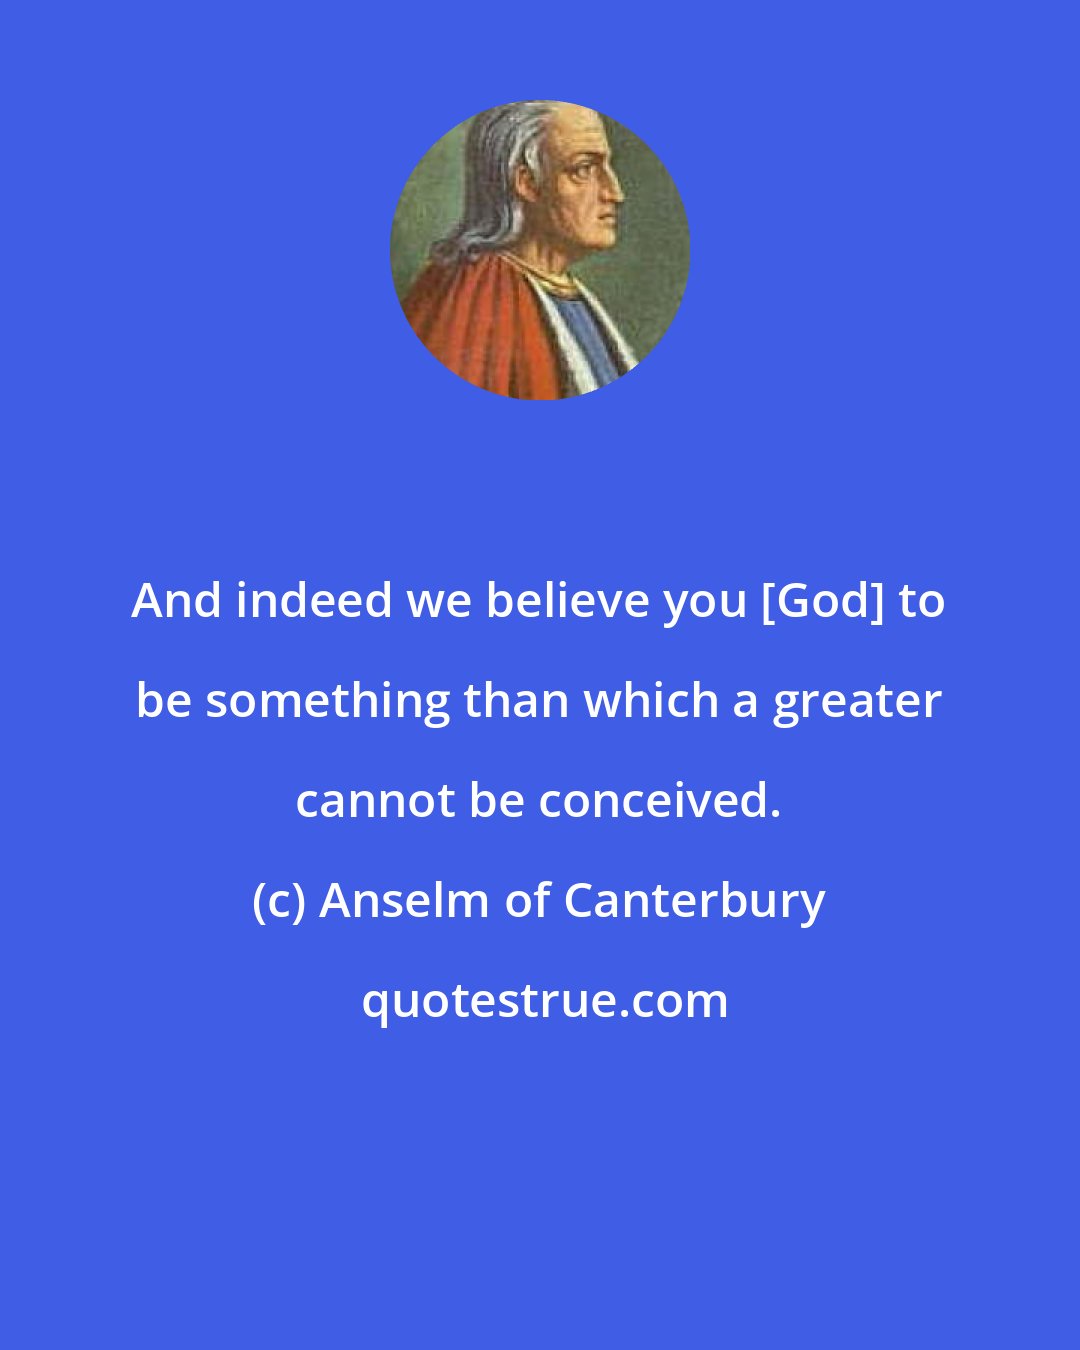 Anselm of Canterbury: And indeed we believe you [God] to be something than which a greater cannot be conceived.